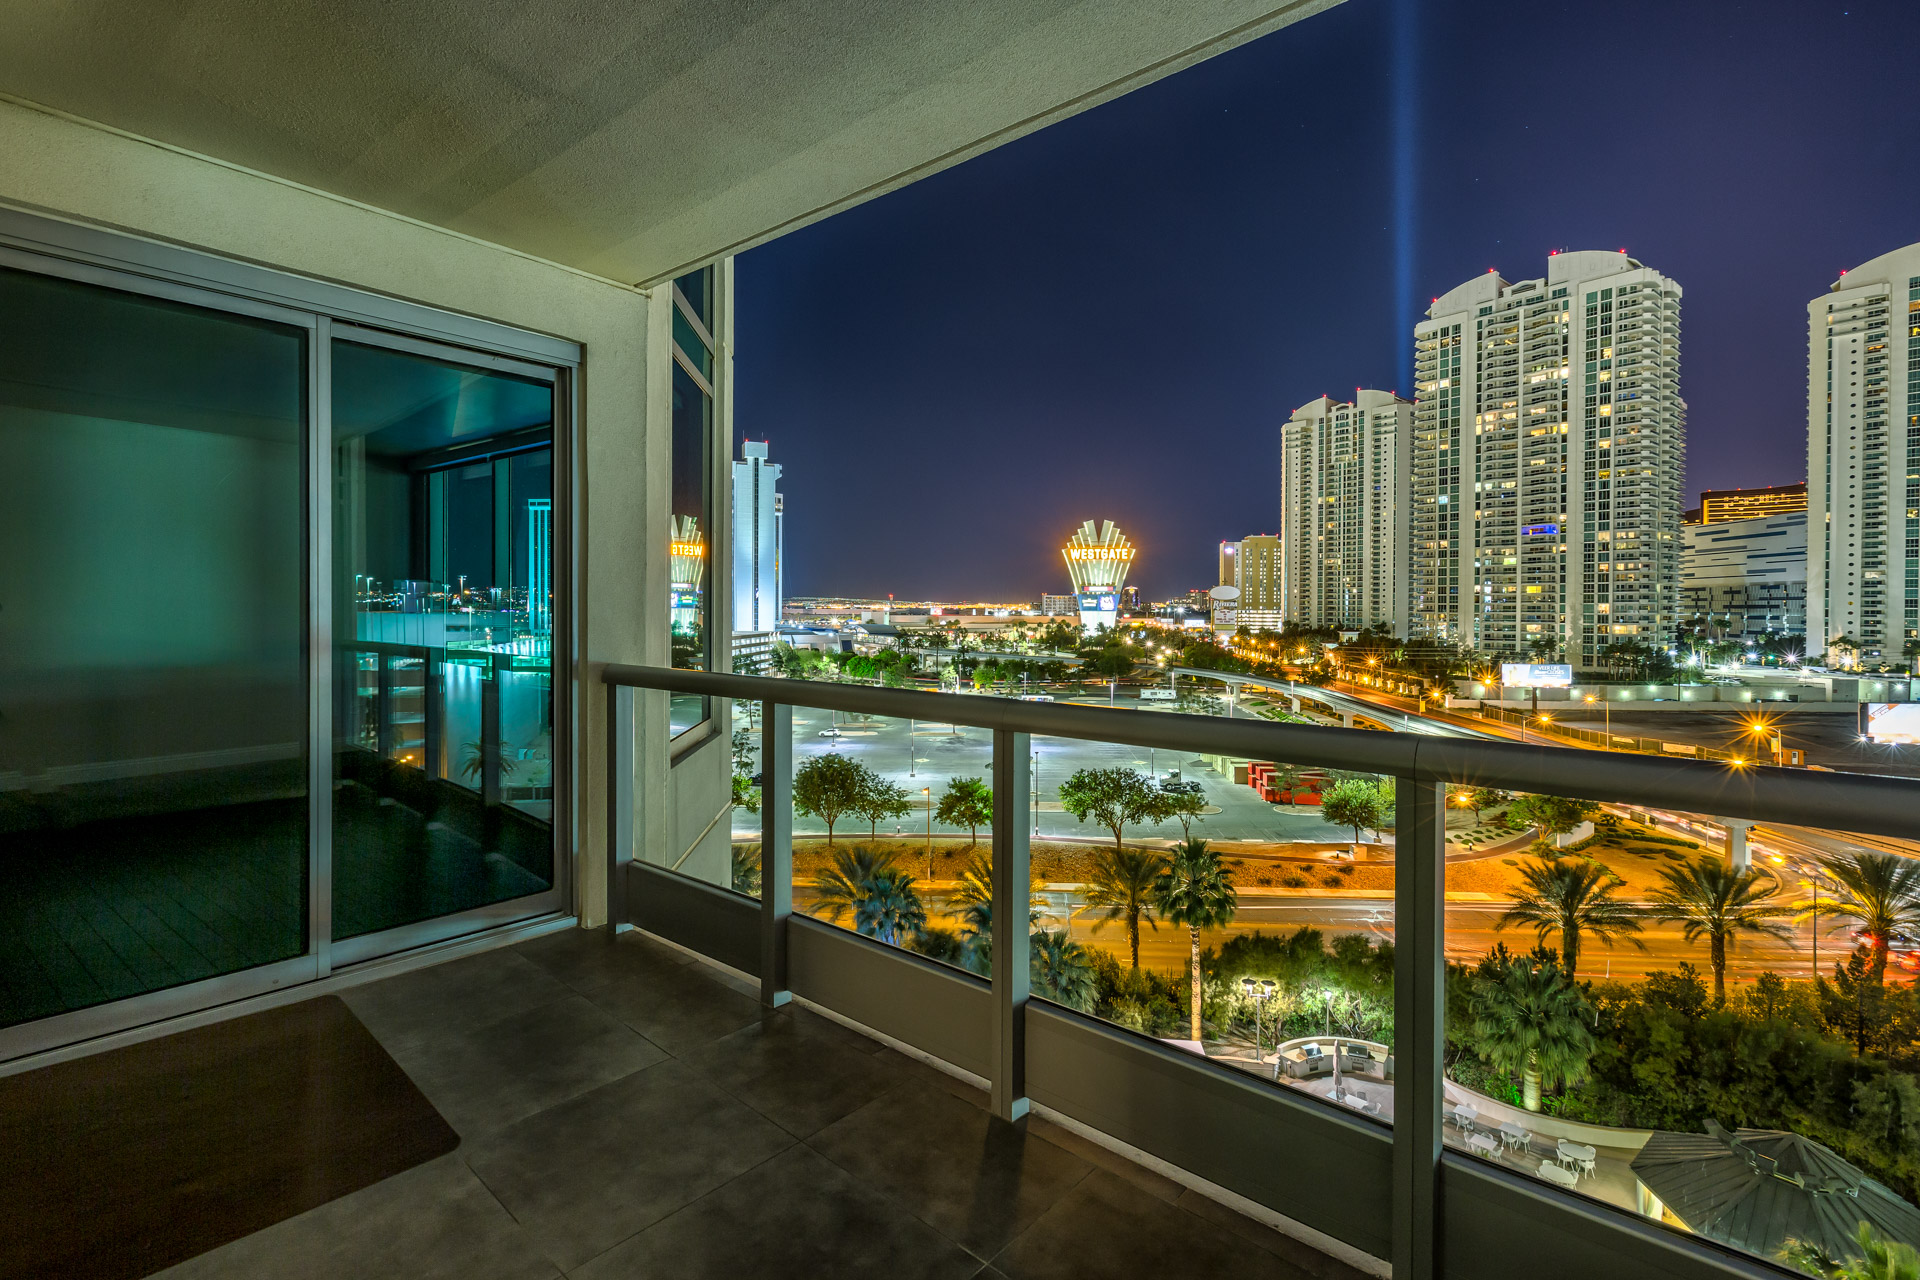 Turnberry -Towers West # 801 Condos- Sold by The Stark Team, Las vegas Luxury Real Estate Agents. Living R